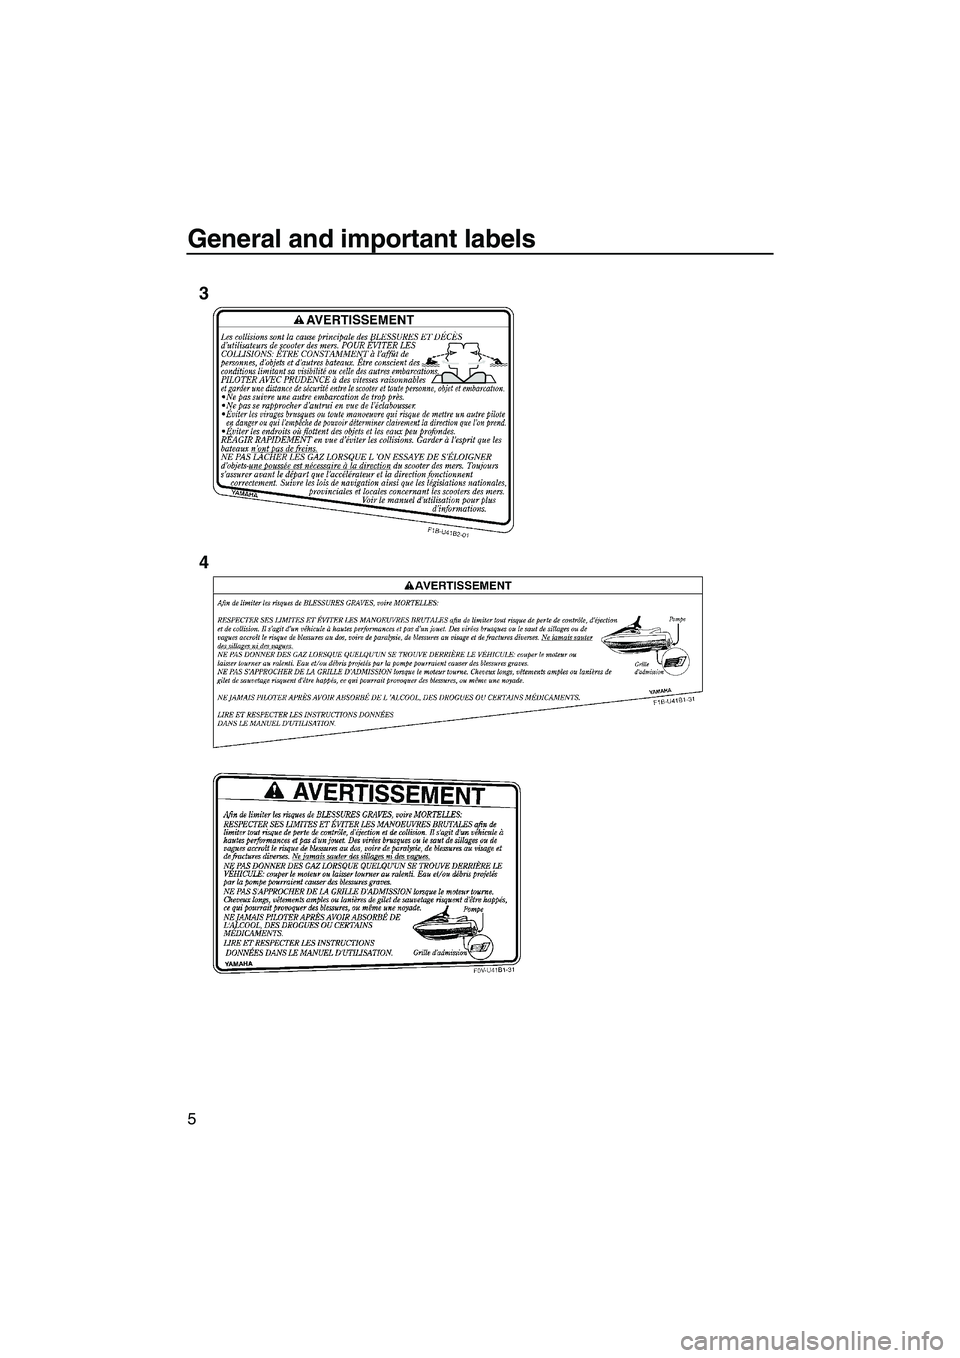 YAMAHA VX SPORT 2010 User Guide General and important labels
5
3
4
UF2N70E0.book  Page 5  Tuesday, October 6, 2009  9:57 AM 